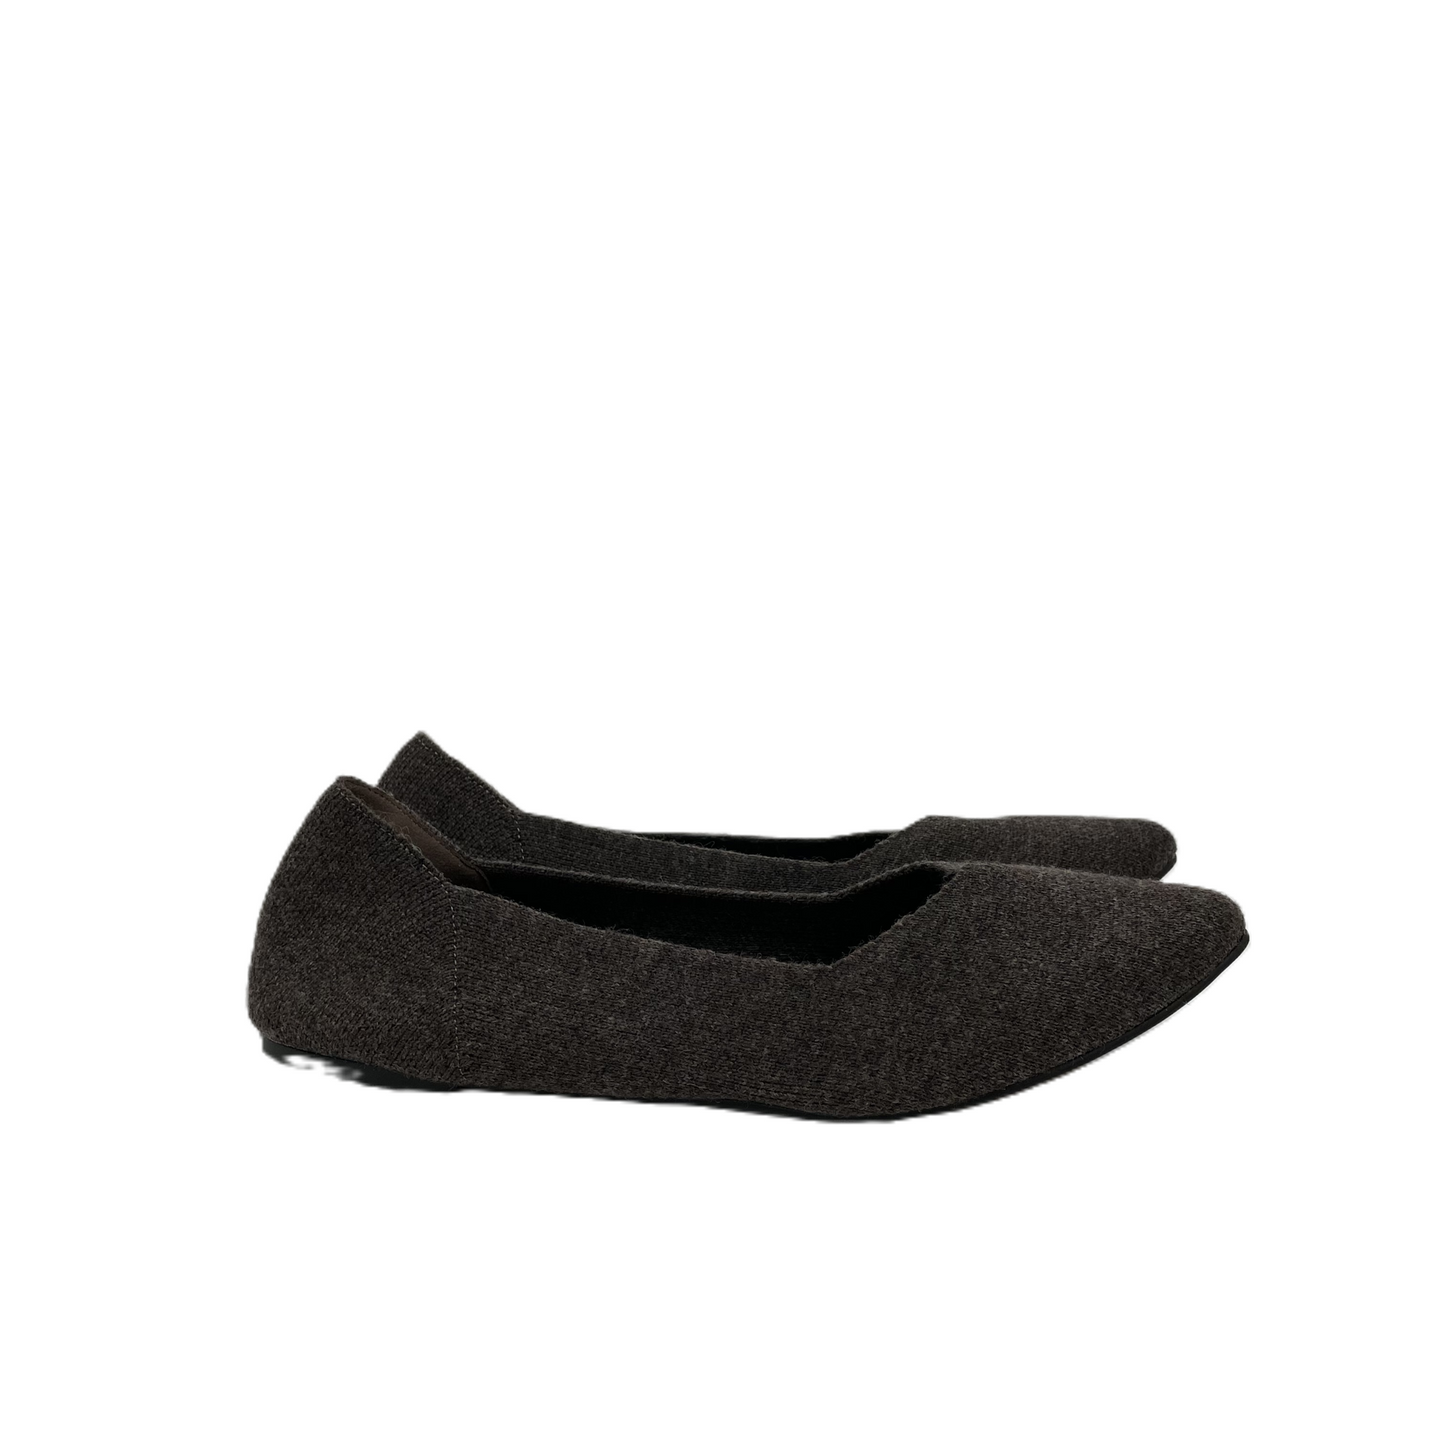 Brown Shoes Flats By Mia, Size: 8.5